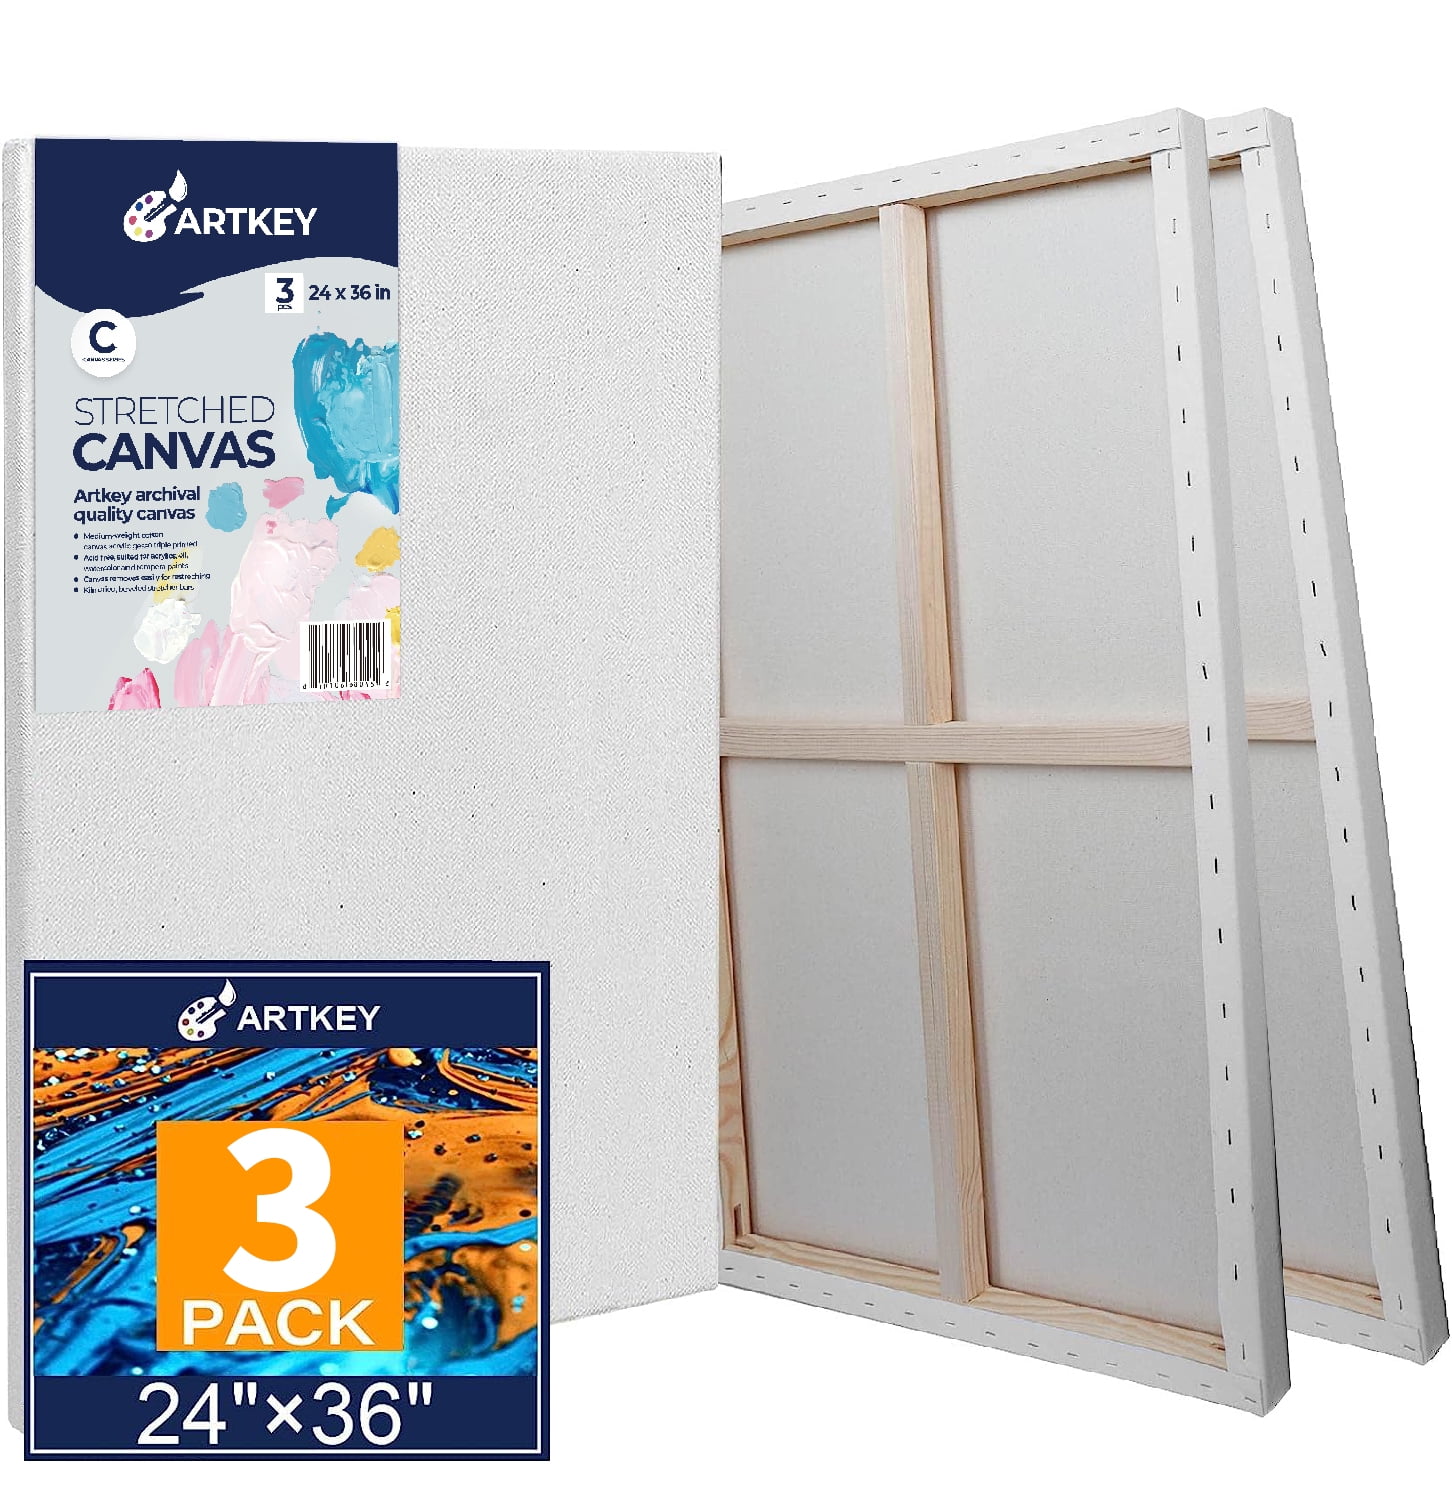 Artkey Mini Canvas, 4x4 inch 24-Pack,100% Cotton Square Small Canvases for Painting for Adult & Kids, Size: 4 x 4, White